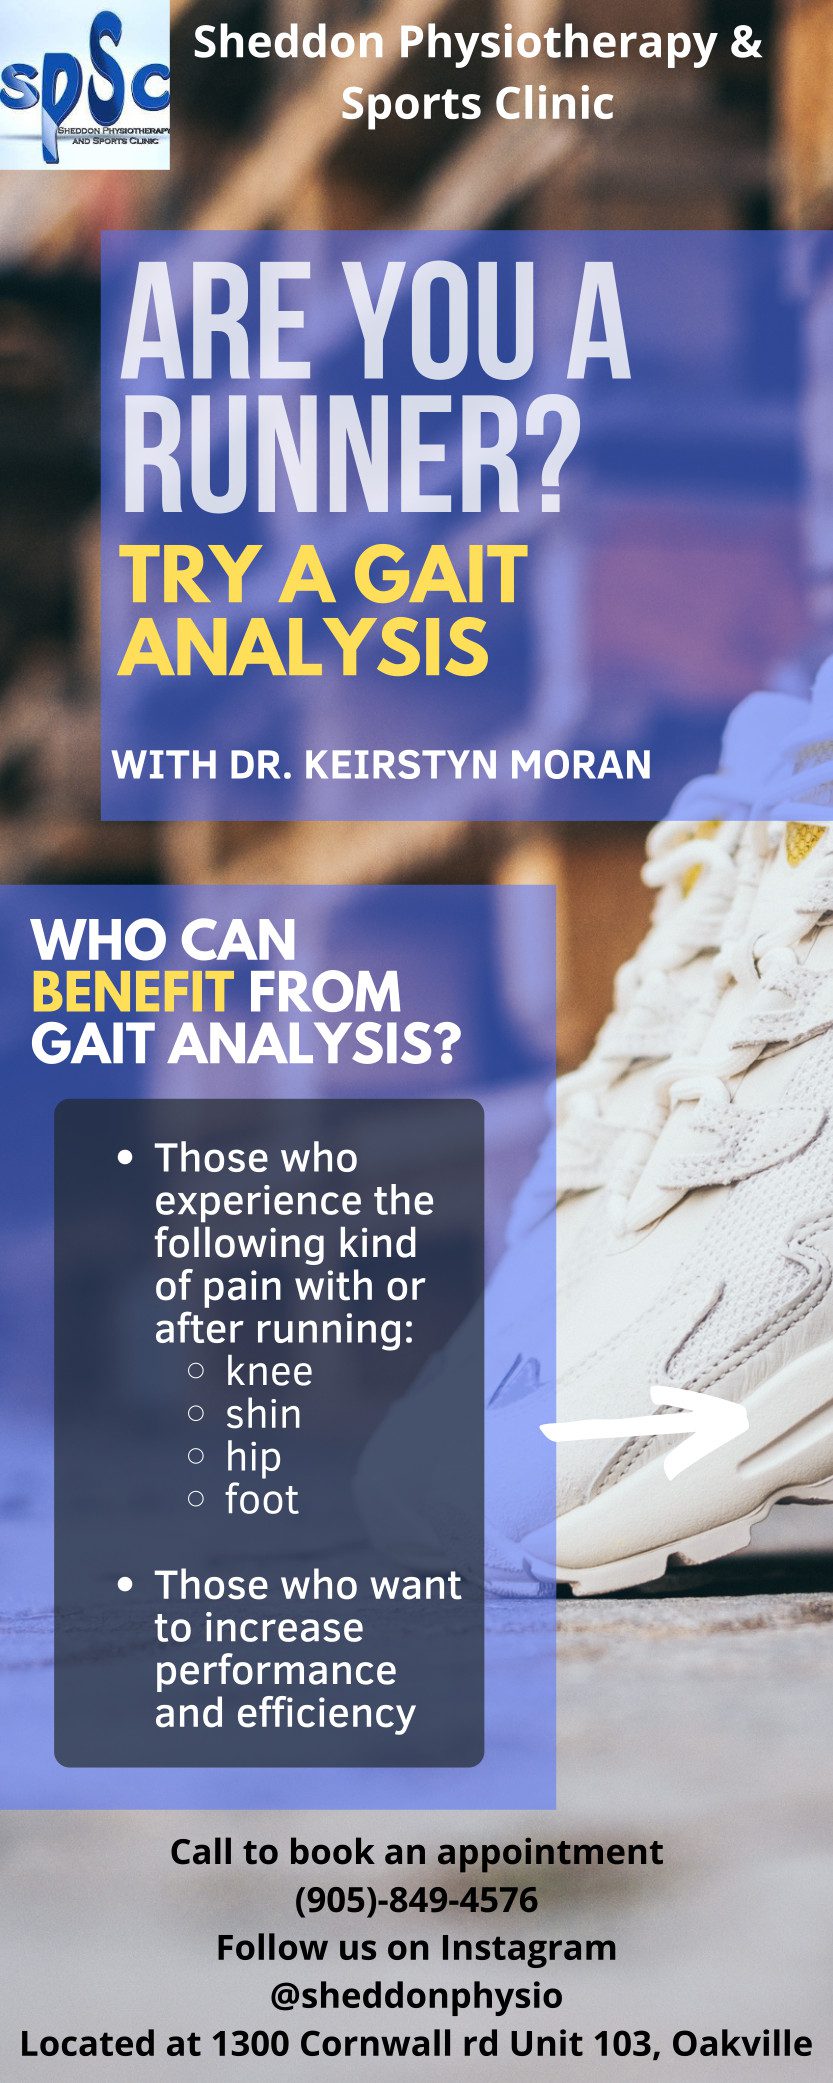 GAIT Analysis for runners at Sheddon Physio Sports Clinic Oakville